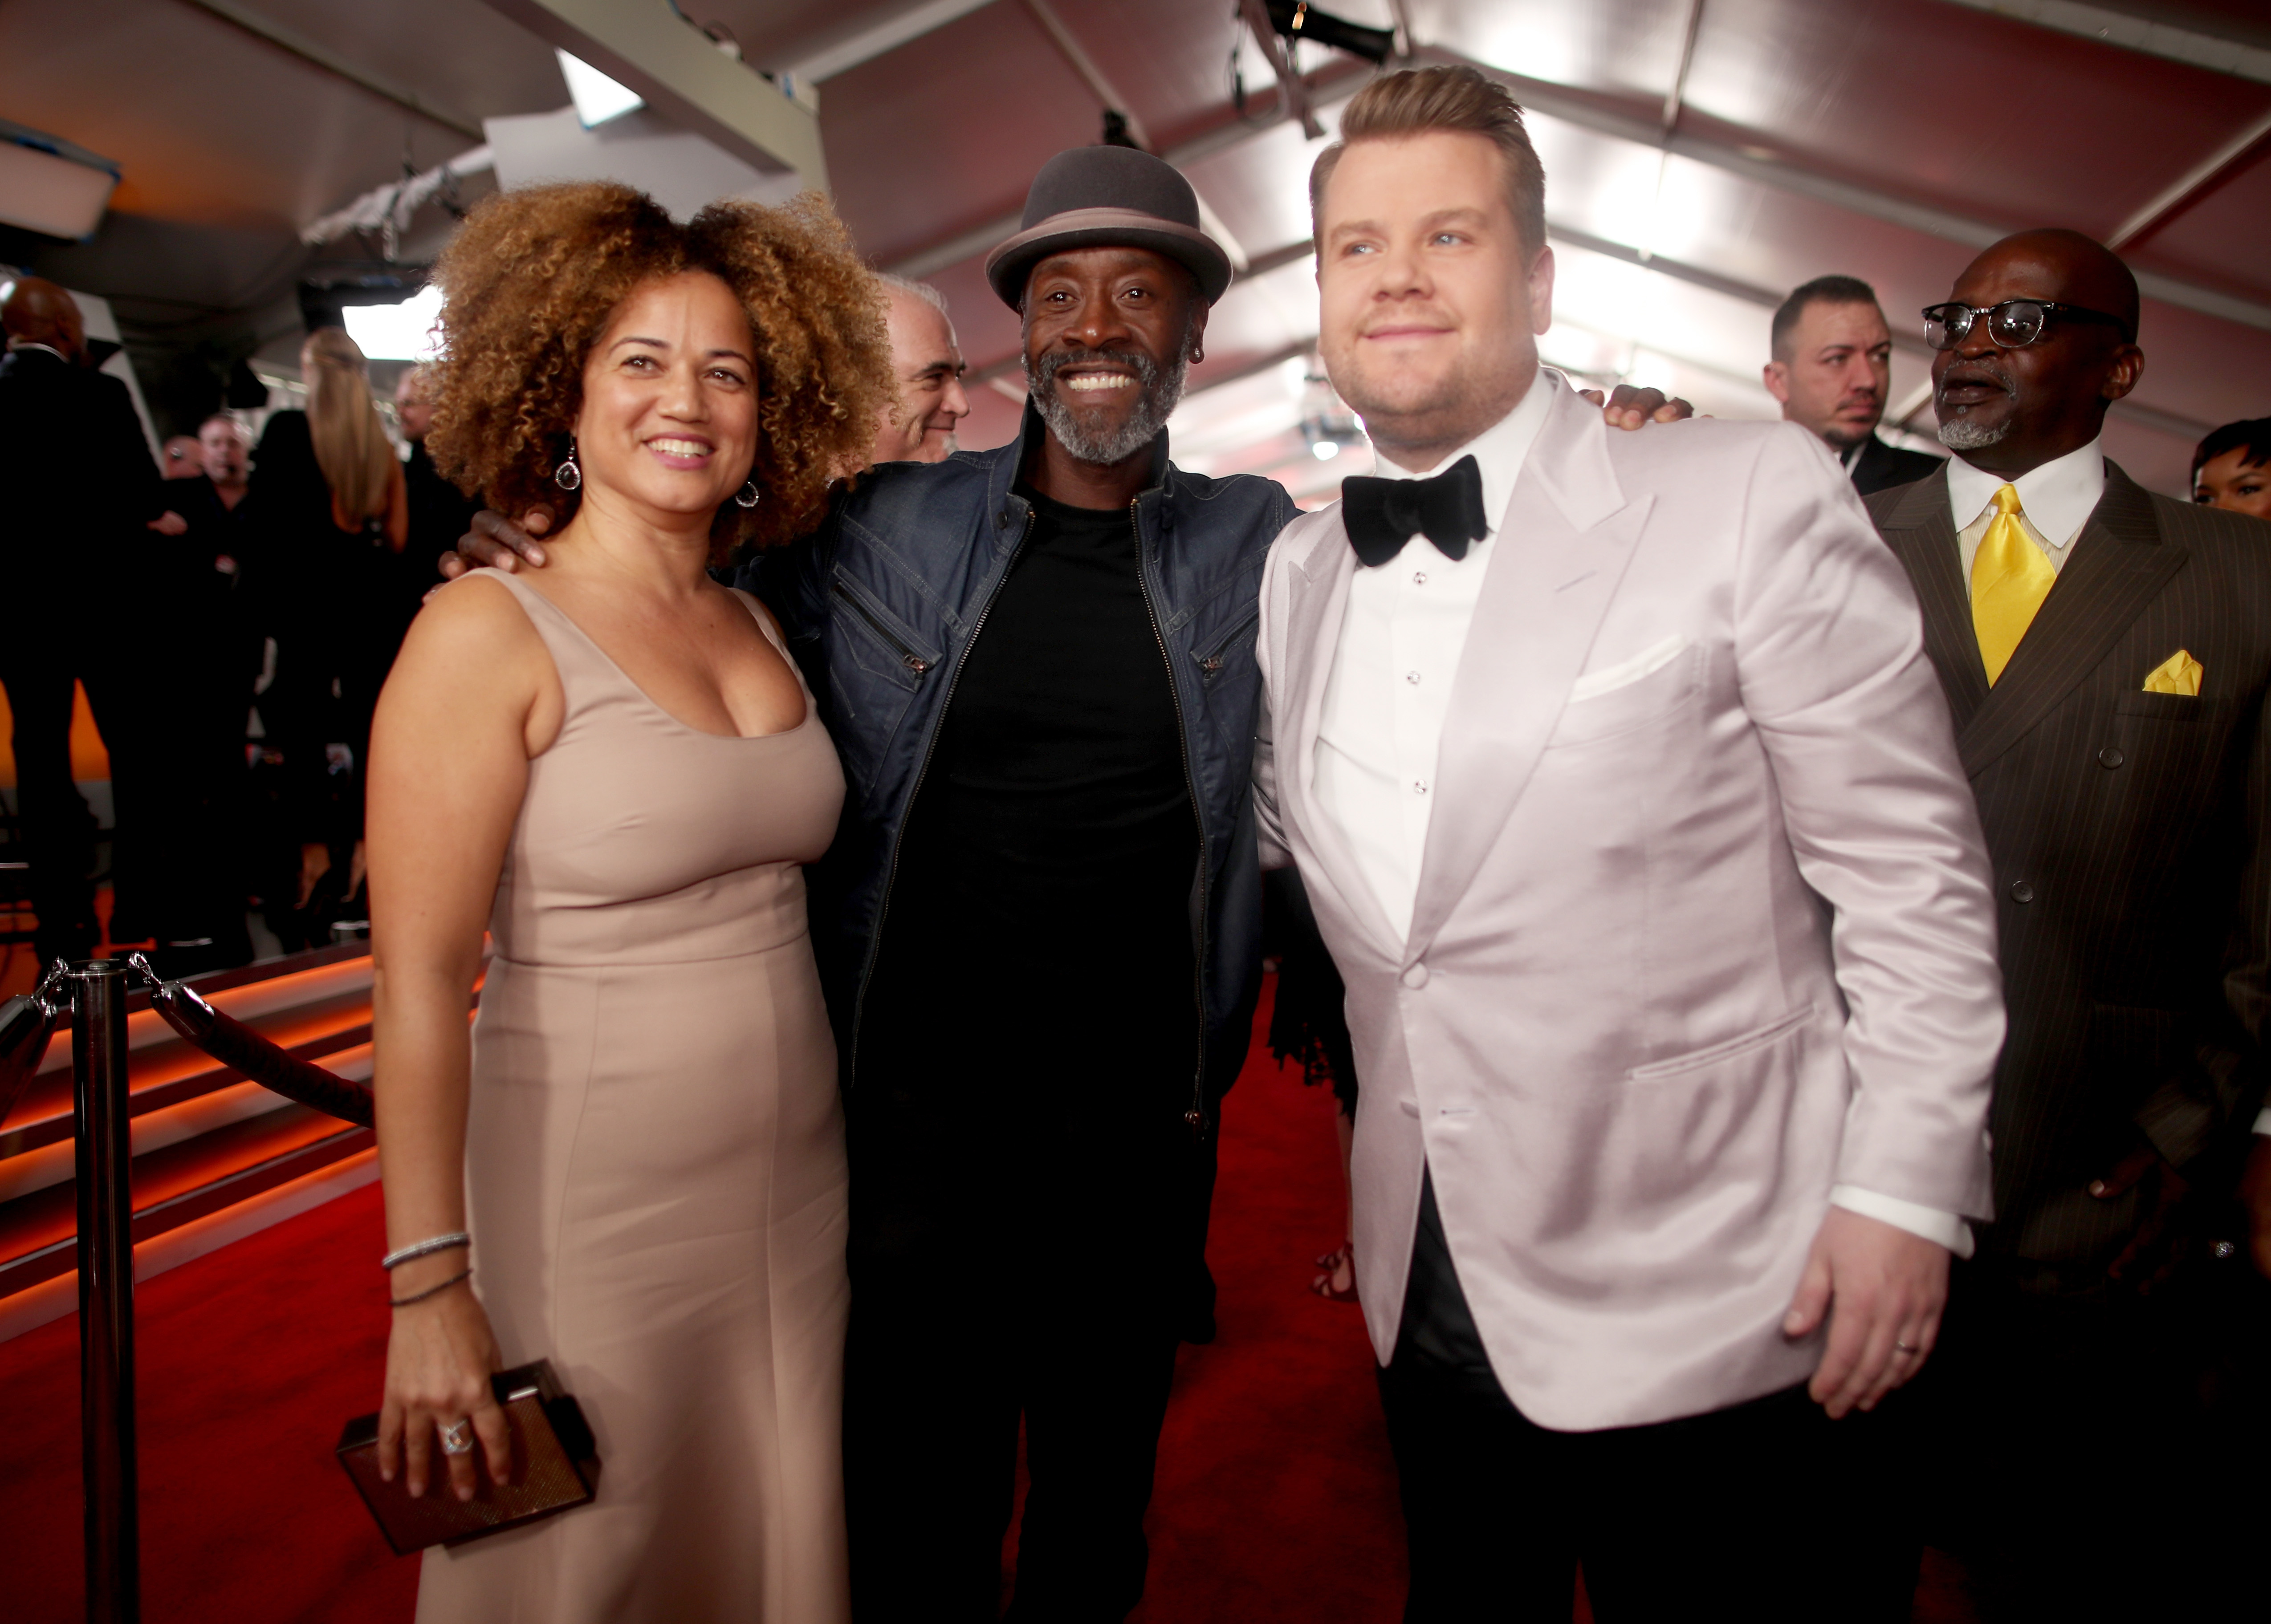 LOS ANGELES, CA - FEBRUARY 12: (L-R) Actors Bridgid Coulter and Don Cheadle and host James Corden attend The 59th GRAMMY Awards at STAPLES Center on February 12, 2017 in Los Angeles, California.   Christopher Polk/Getty Images for NARAS/AFP